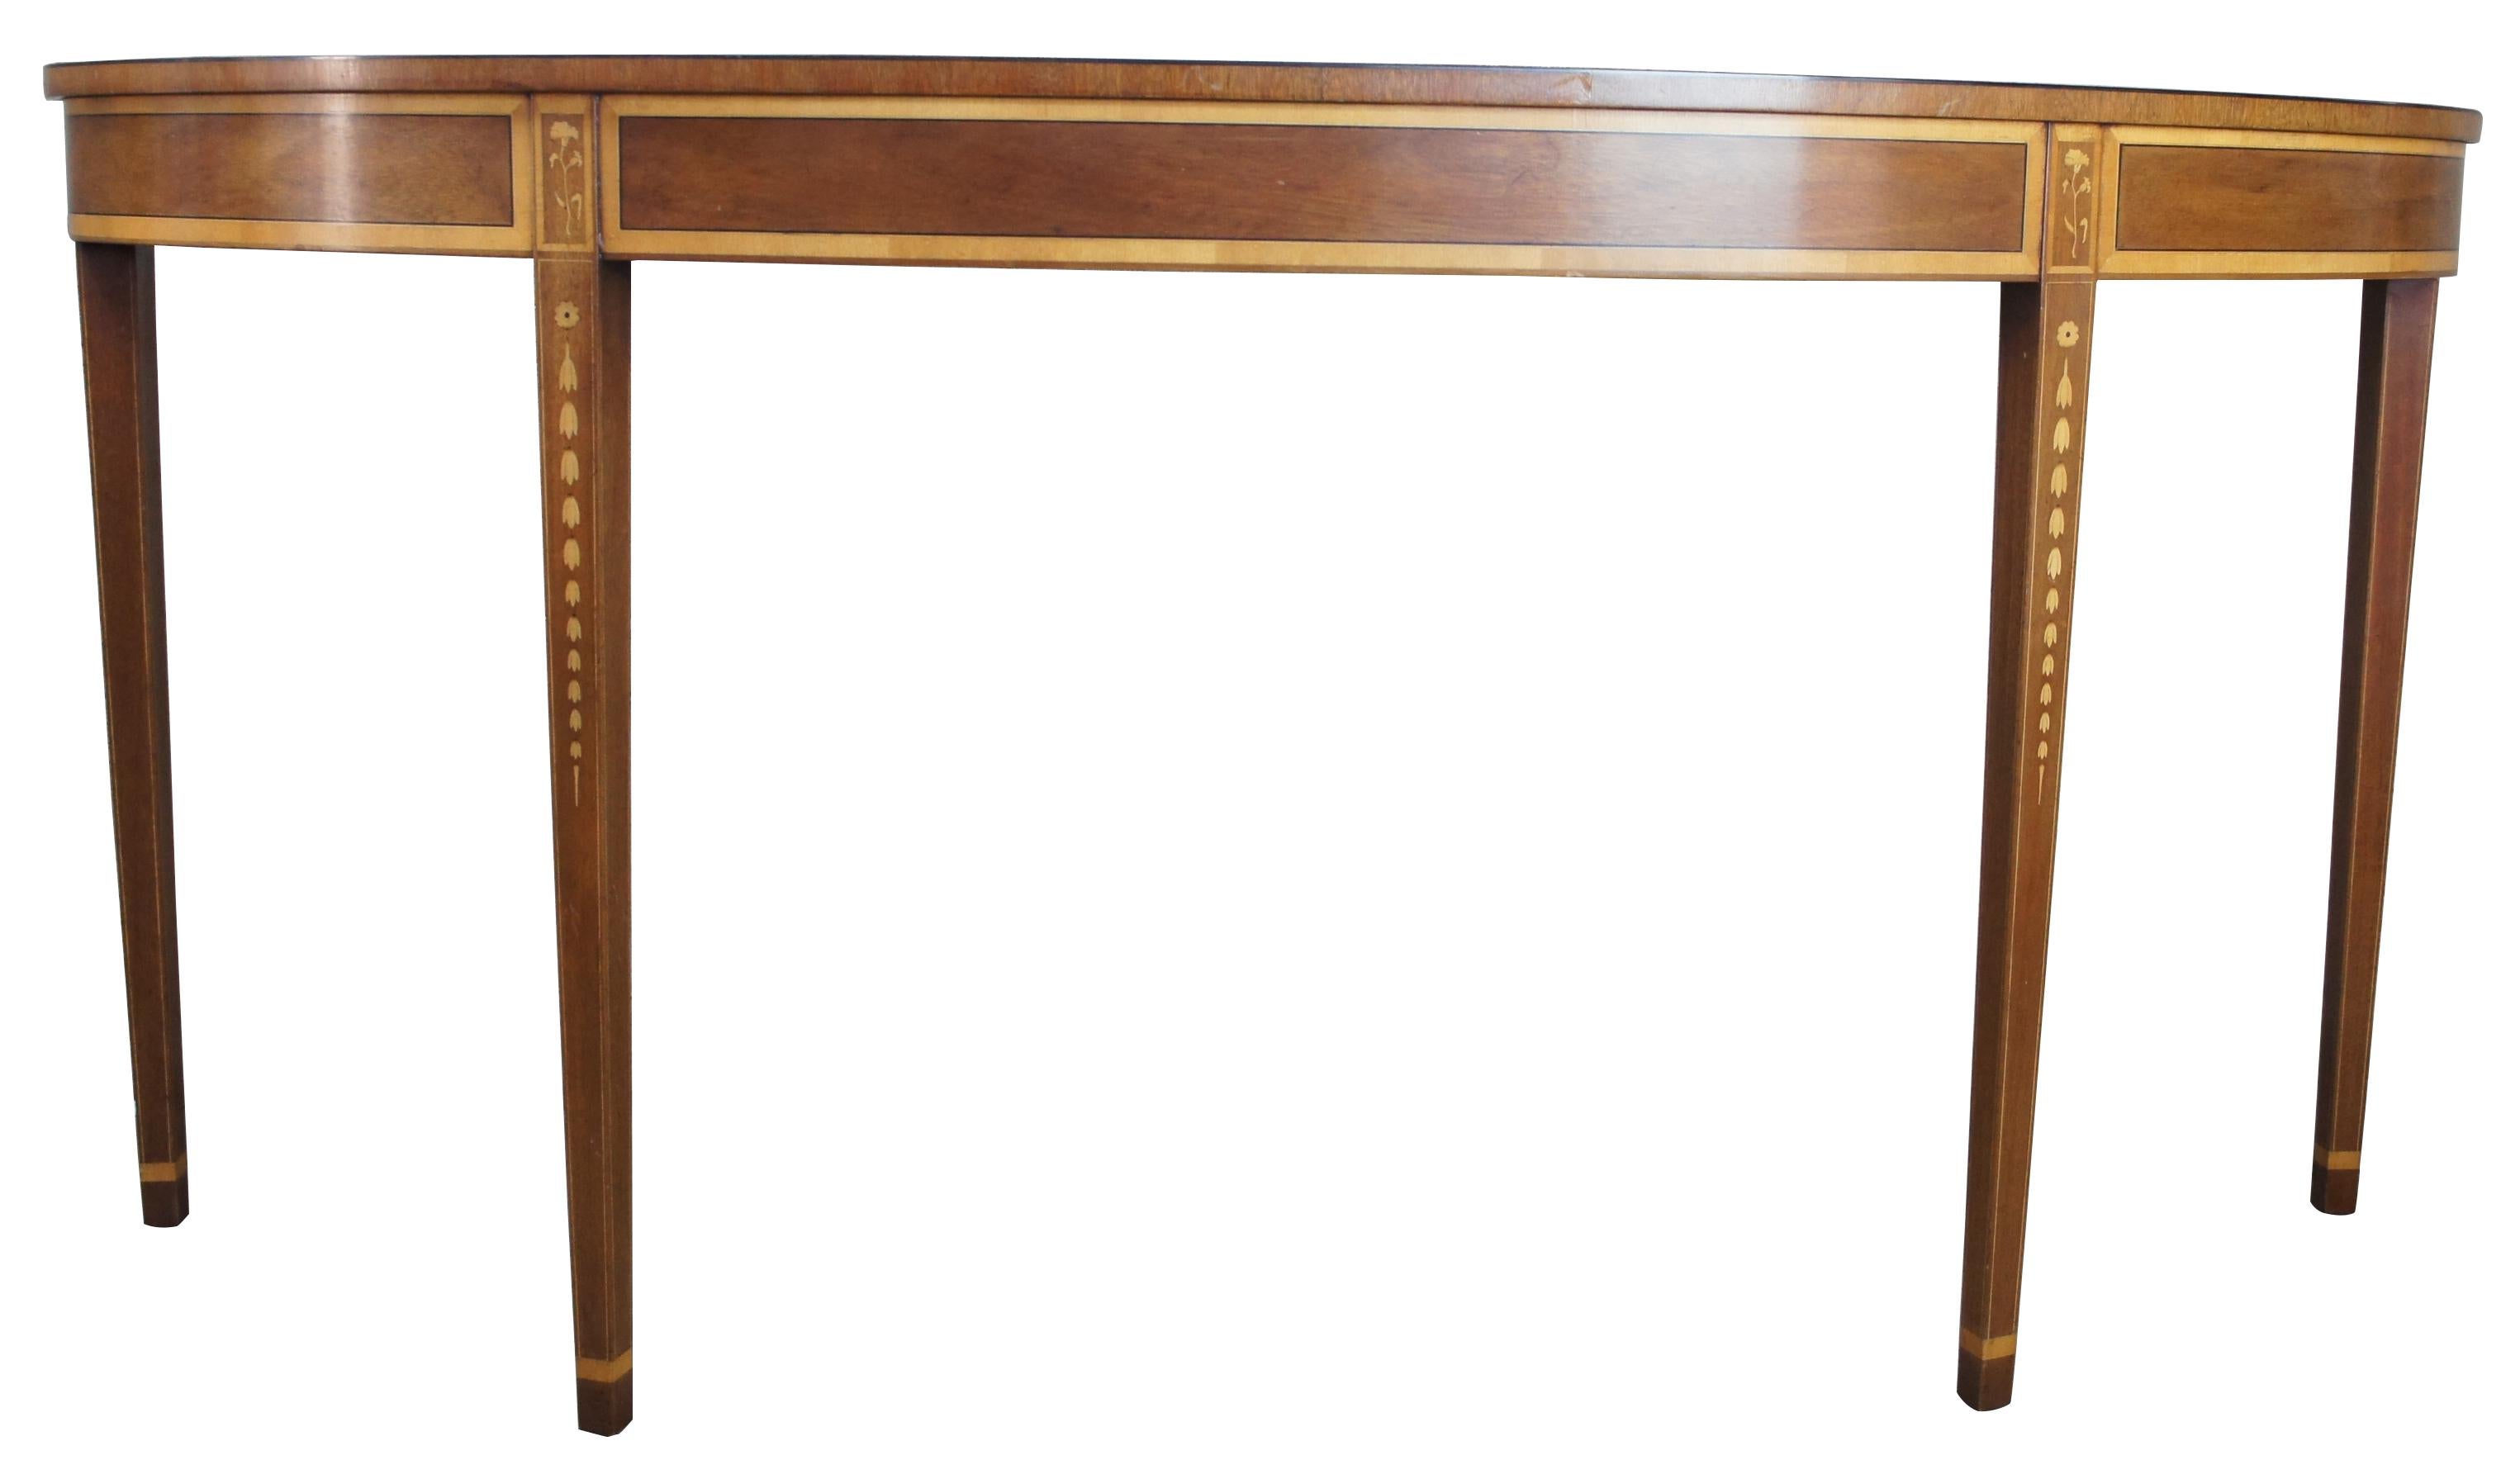 Kittinger demilune half round banded mahogany console entry hall table D1804

A stunning demilune or crescent shaped hall console table or server. Signed 